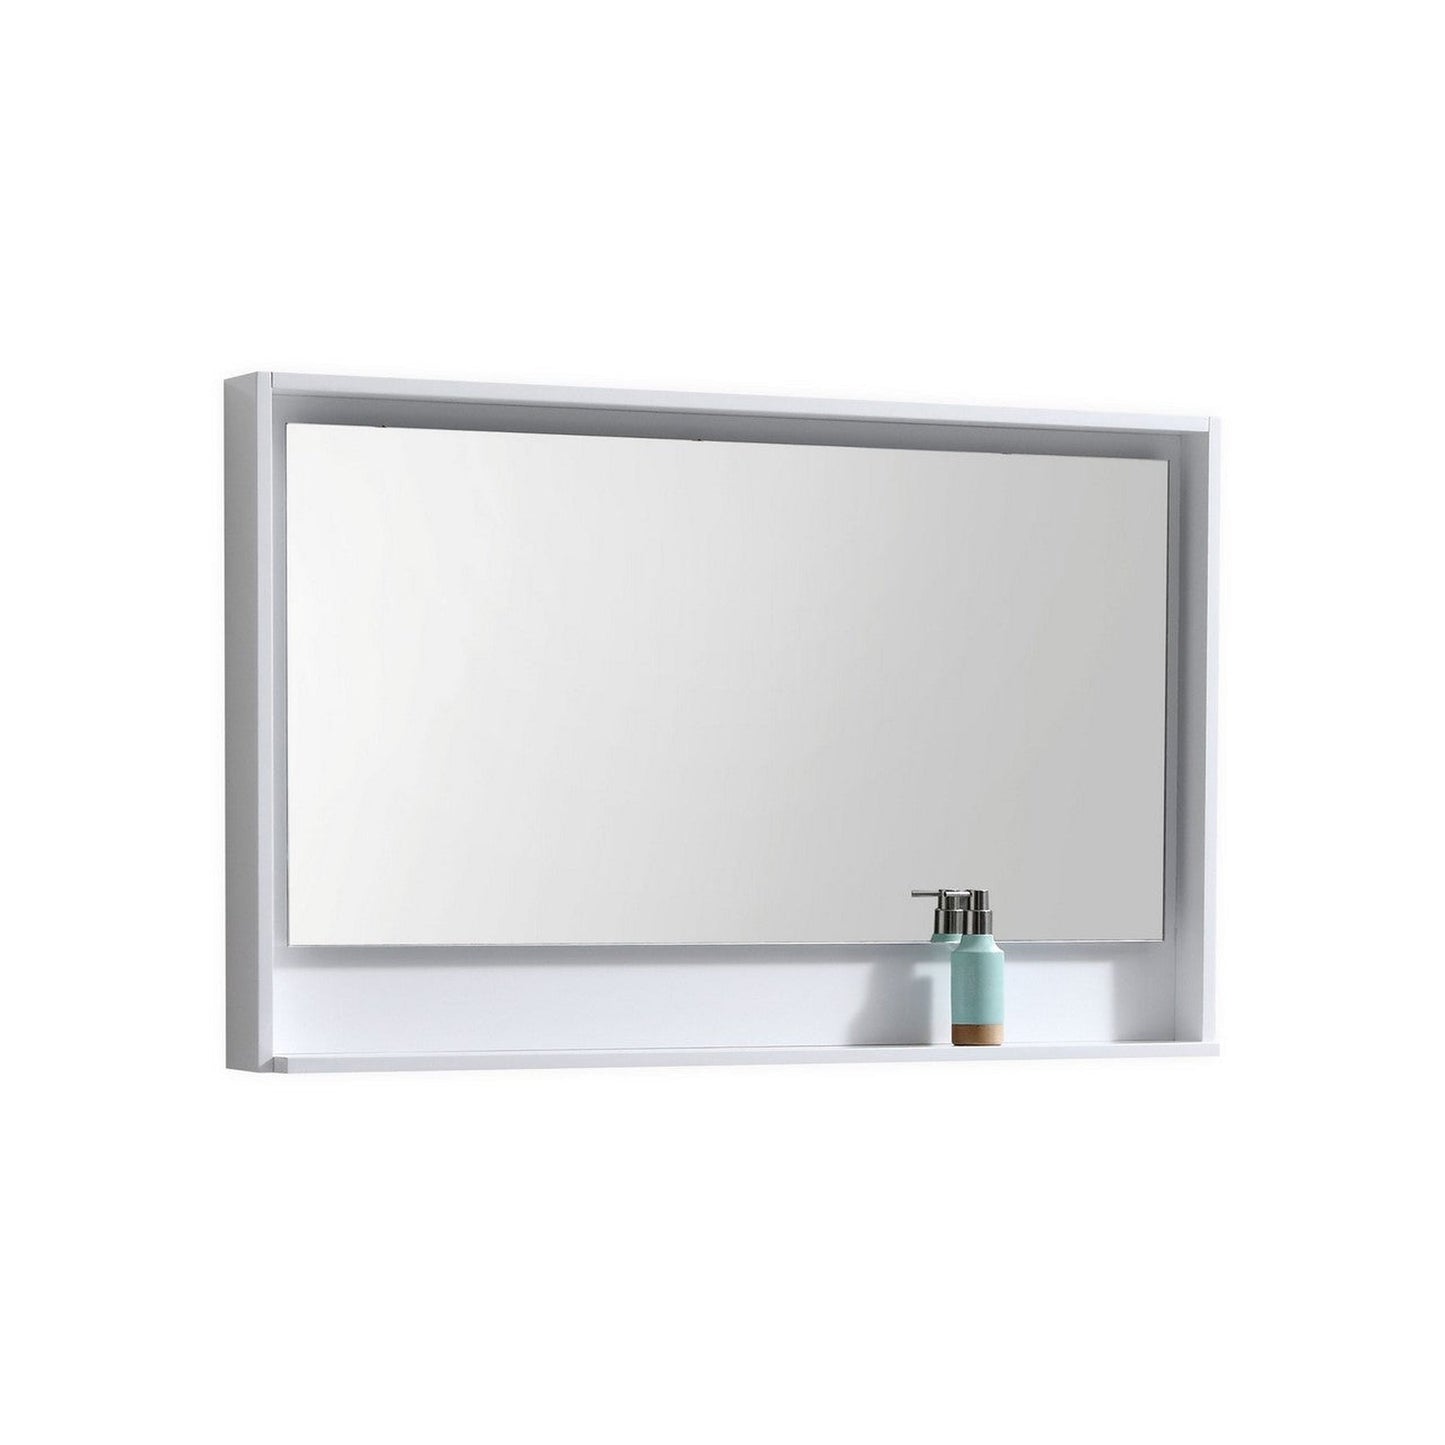 KubeBath Haus 48" White Acrylic Sink With Chrome Finish Stainless Steel Console And 48" White Framed Mirror With Shelf